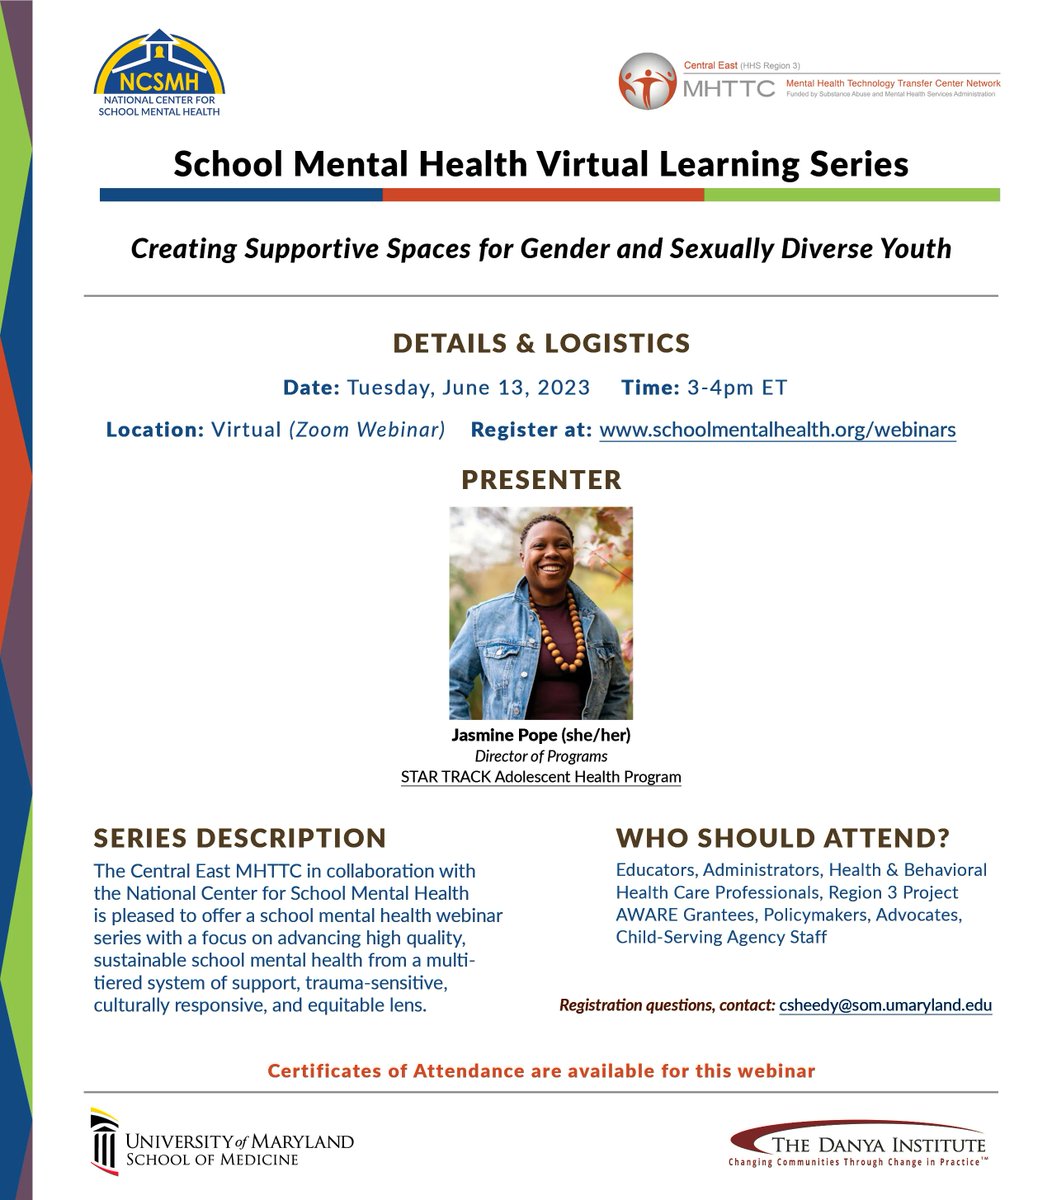 Join us today for Creating Supportive Spaces for Gender- and Sexually-Diverse Youth, with Jasmine Pope! This free webinar is 3-4pm ET and part of the #SchoolMentalHealth Virtual Learning Series. #Pride buff.ly/3NeOKi0